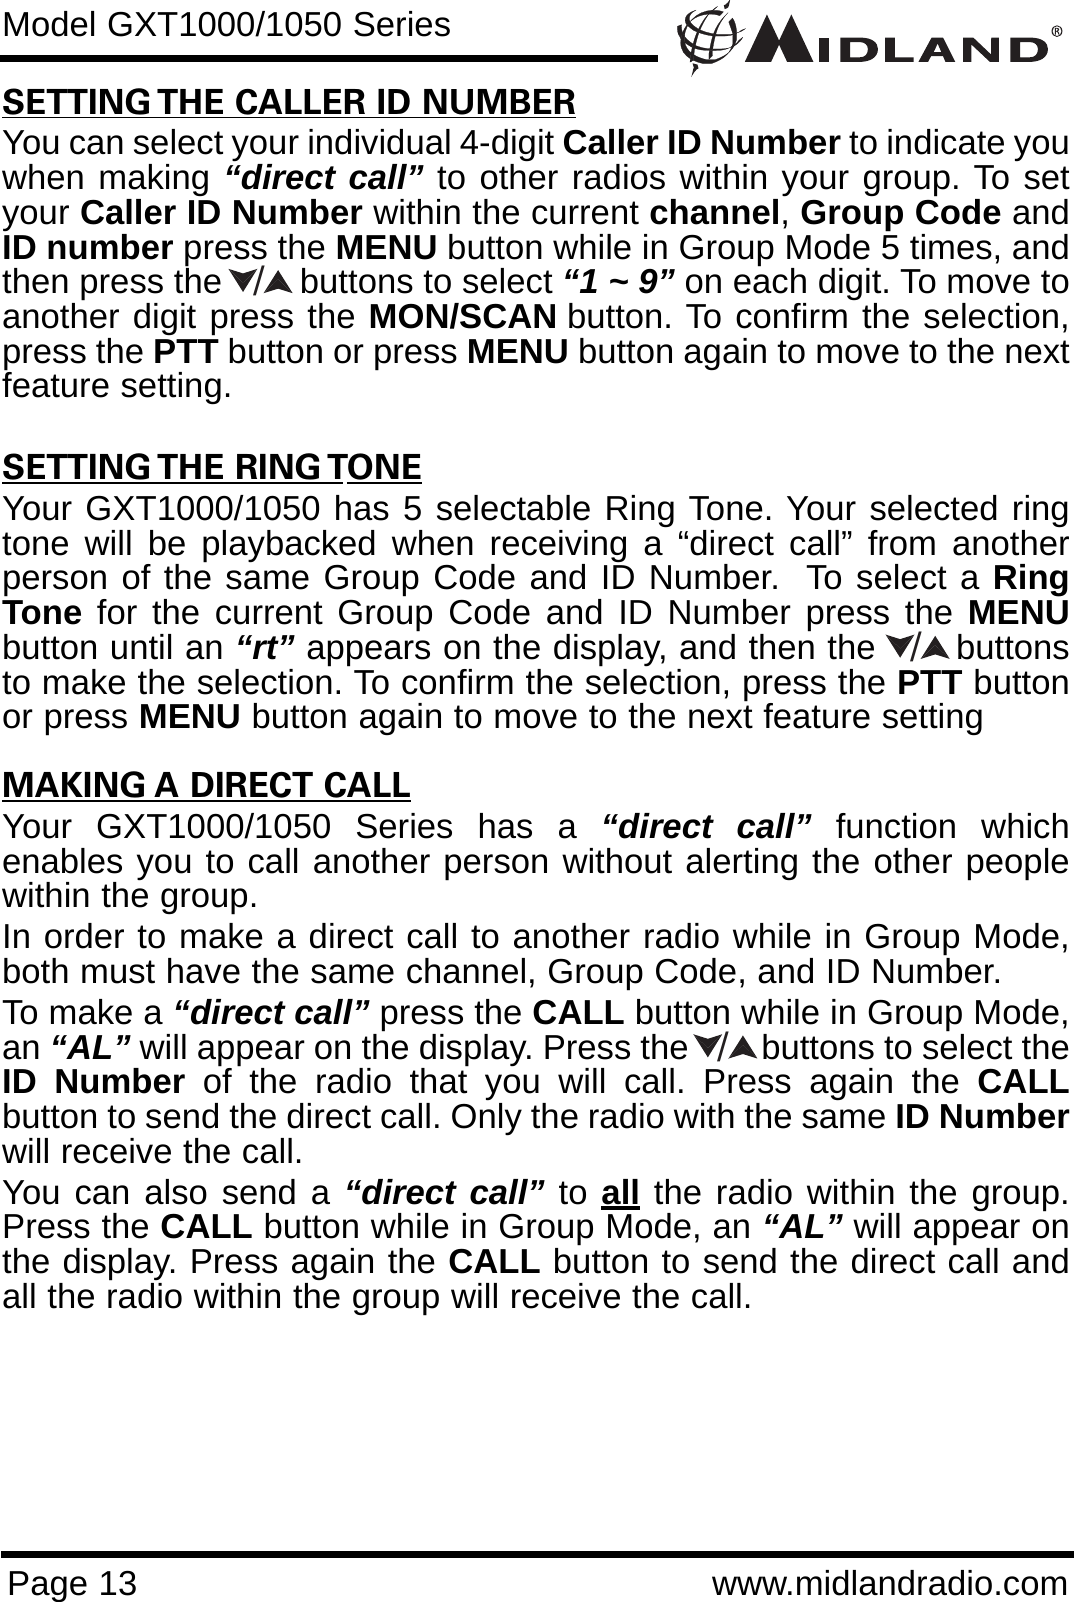 Page 13 www.midlandradio.comModel GXT1000/1050 SeriesSETTING THE CALLER ID NUMBERYou can select your individual 4-digit Caller ID Number to indicate youwhen making “direct call” to other radios within your group. To setyour Caller ID Number within the current channel, Group Code andID number press the MENU button while in Group Mode 5 times, andthen press the        buttons to select “1 ~ 9” on each digit. To move toanother digit press the MON/SCAN button. To confirm the selection,press the PTT button or press MENU button again to move to the nextfeature setting. SETTING THE RING TONEYour GXT1000/1050 has 5 selectable Ring Tone. Your selected ringtone will be playbacked when receiving a “direct call” from anotherperson of the same Group Code and ID Number.  To select a RingTone for the current Group Code and ID Number press the MENUbutton until an “rt” appears on the display, and then the       buttonsto make the selection. To confirm the selection, press the PTT buttonor press MENU button again to move to the next feature settingMAKING A DIRECT CALLYour GXT1000/1050 Series has a “direct call” function whichenables you to call another person without alerting the other peoplewithin the group.In order to make a direct call to another radio while in Group Mode,both must have the same channel, Group Code, and ID Number.To make a “direct call” press the CALL button while in Group Mode,an “AL” will appear on the display. Press the        buttons to select theID Number of the radio that you will call. Press again the CALLbutton to send the direct call. Only the radio with the same ID Numberwill receive the call.You can also send a “direct call” to all the radio within the group.Press the CALL button while in Group Mode, an “AL” will appear onthe display. Press again the CALL button to send the direct call andall the radio within the group will receive the call.///